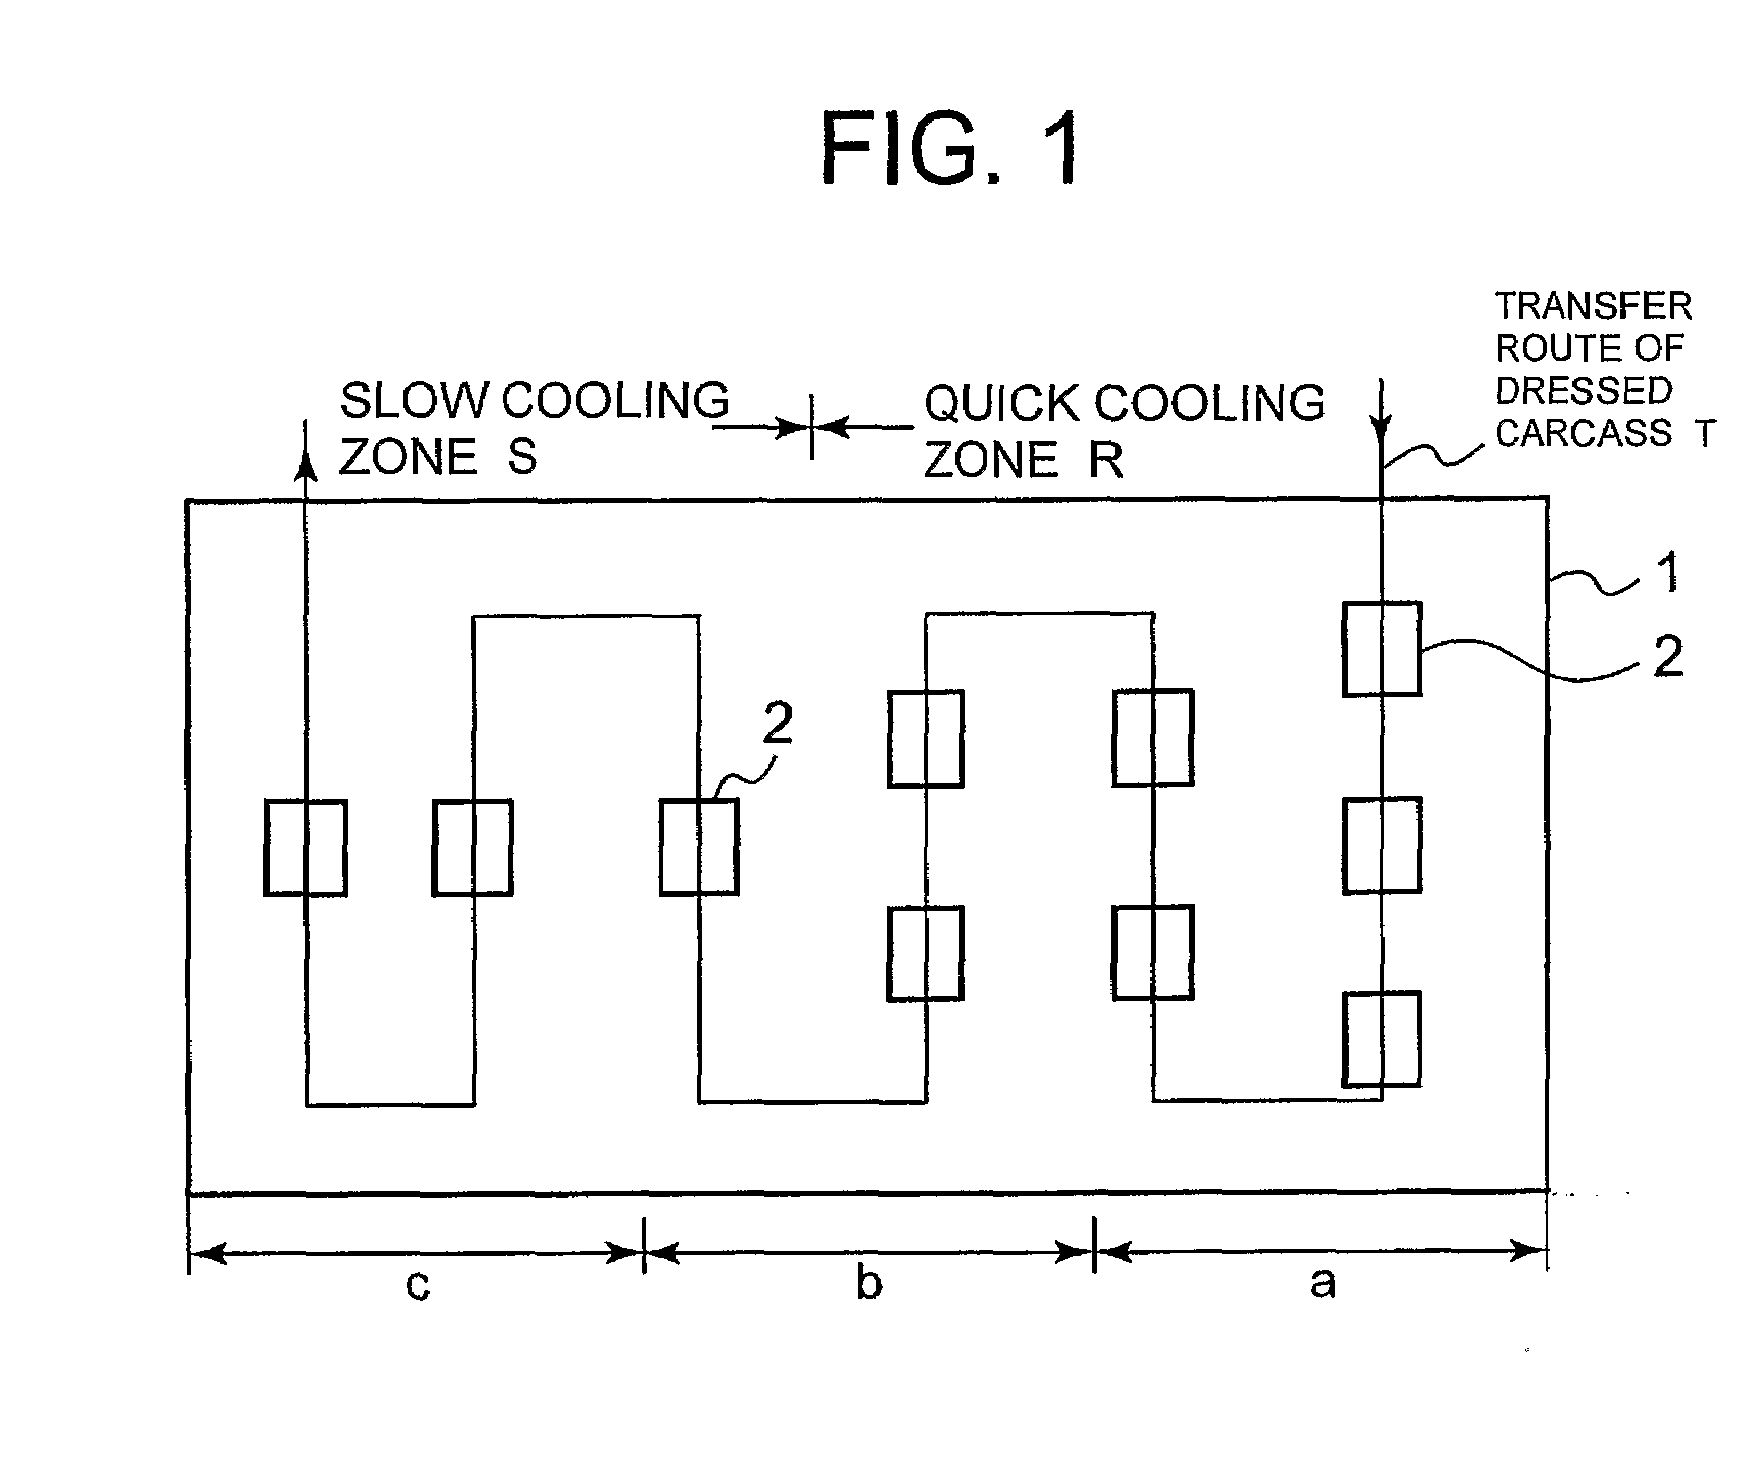 Method and system for cooling of dressed carcasses